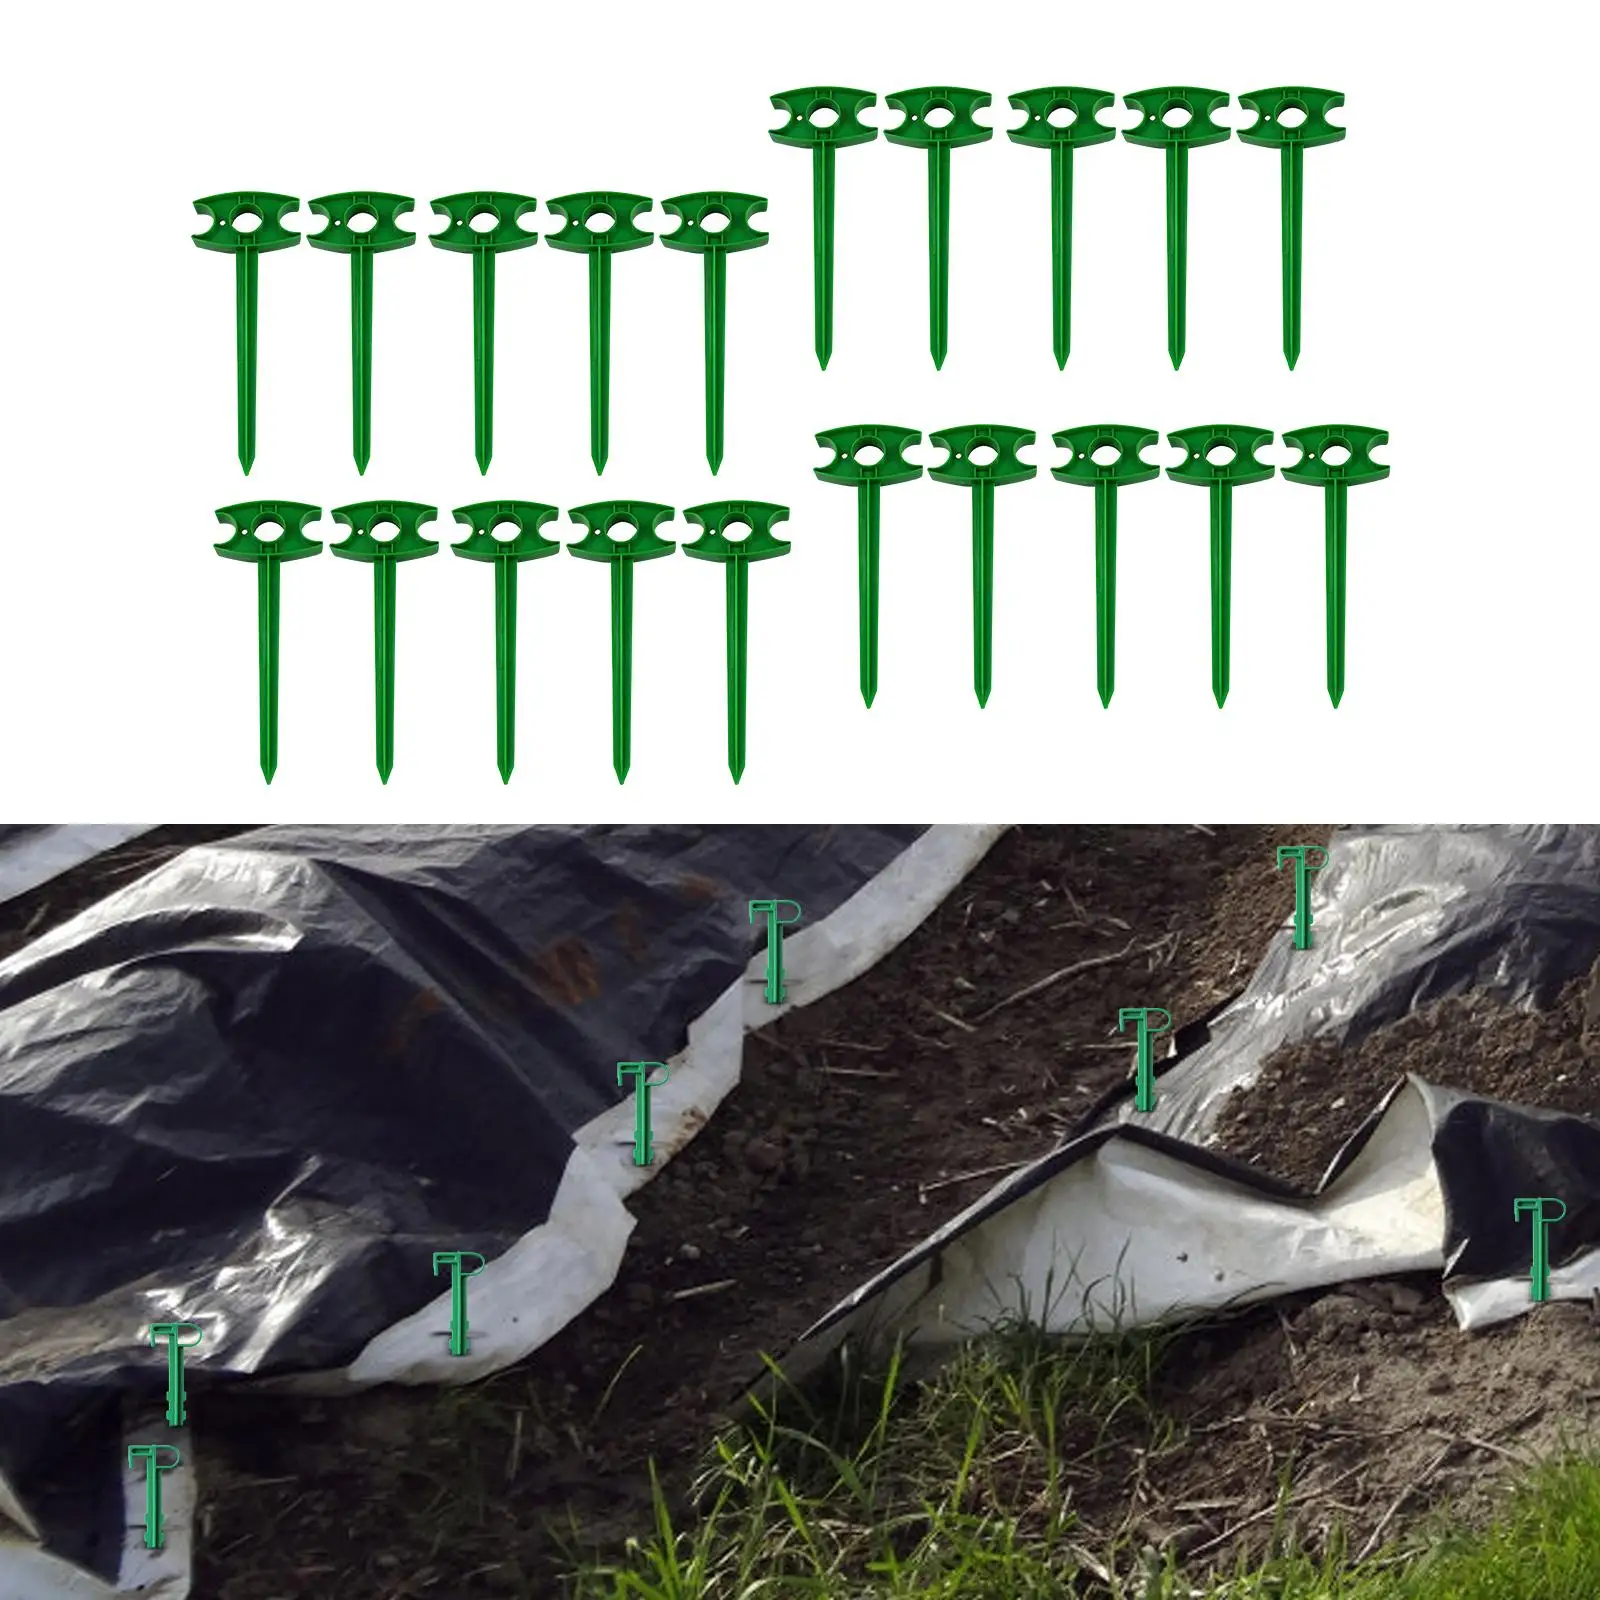 20x Garden Stakes Yard Tarp Stakes Multifunctional Durable Landscape Stakes for Keeping Garden Netting Down Lawn Edging